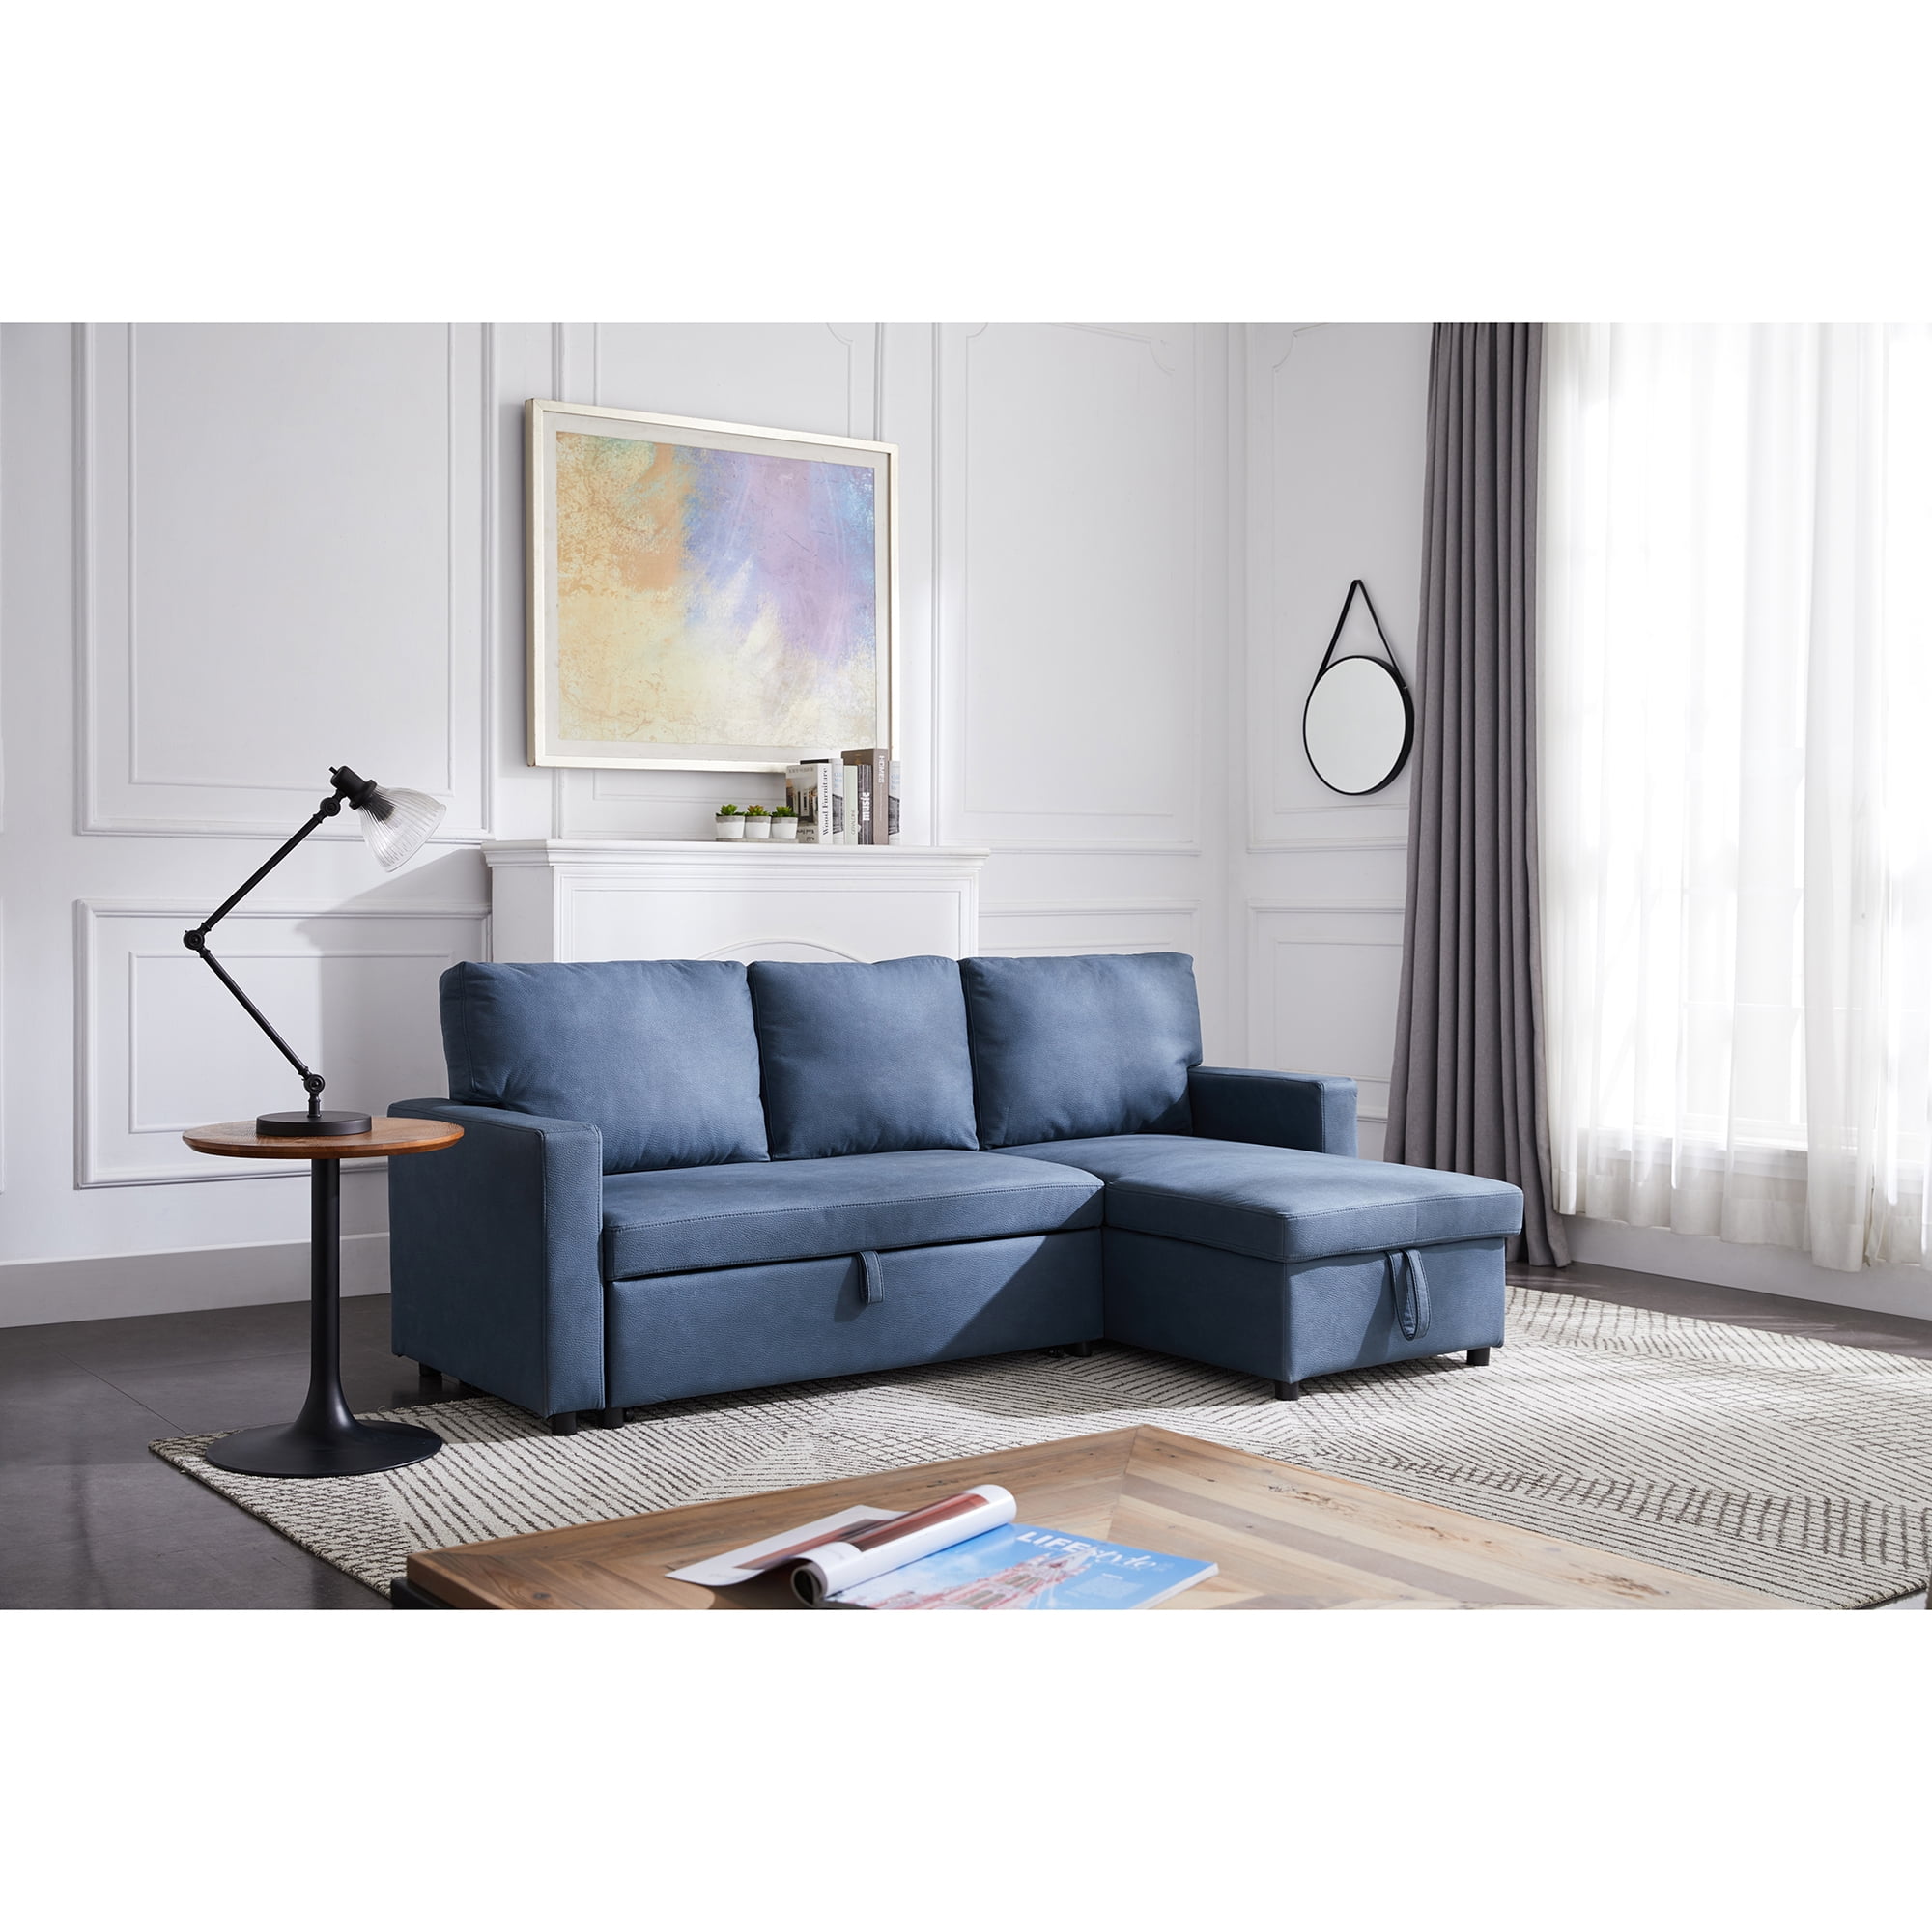 Sectional Sofa Set Reversible L-Shape Couch with Storage, Loveseat Sleeper  Sofa Chaise with Pull Out Bed for Space Saving (Navy Blue) - Walmart.com